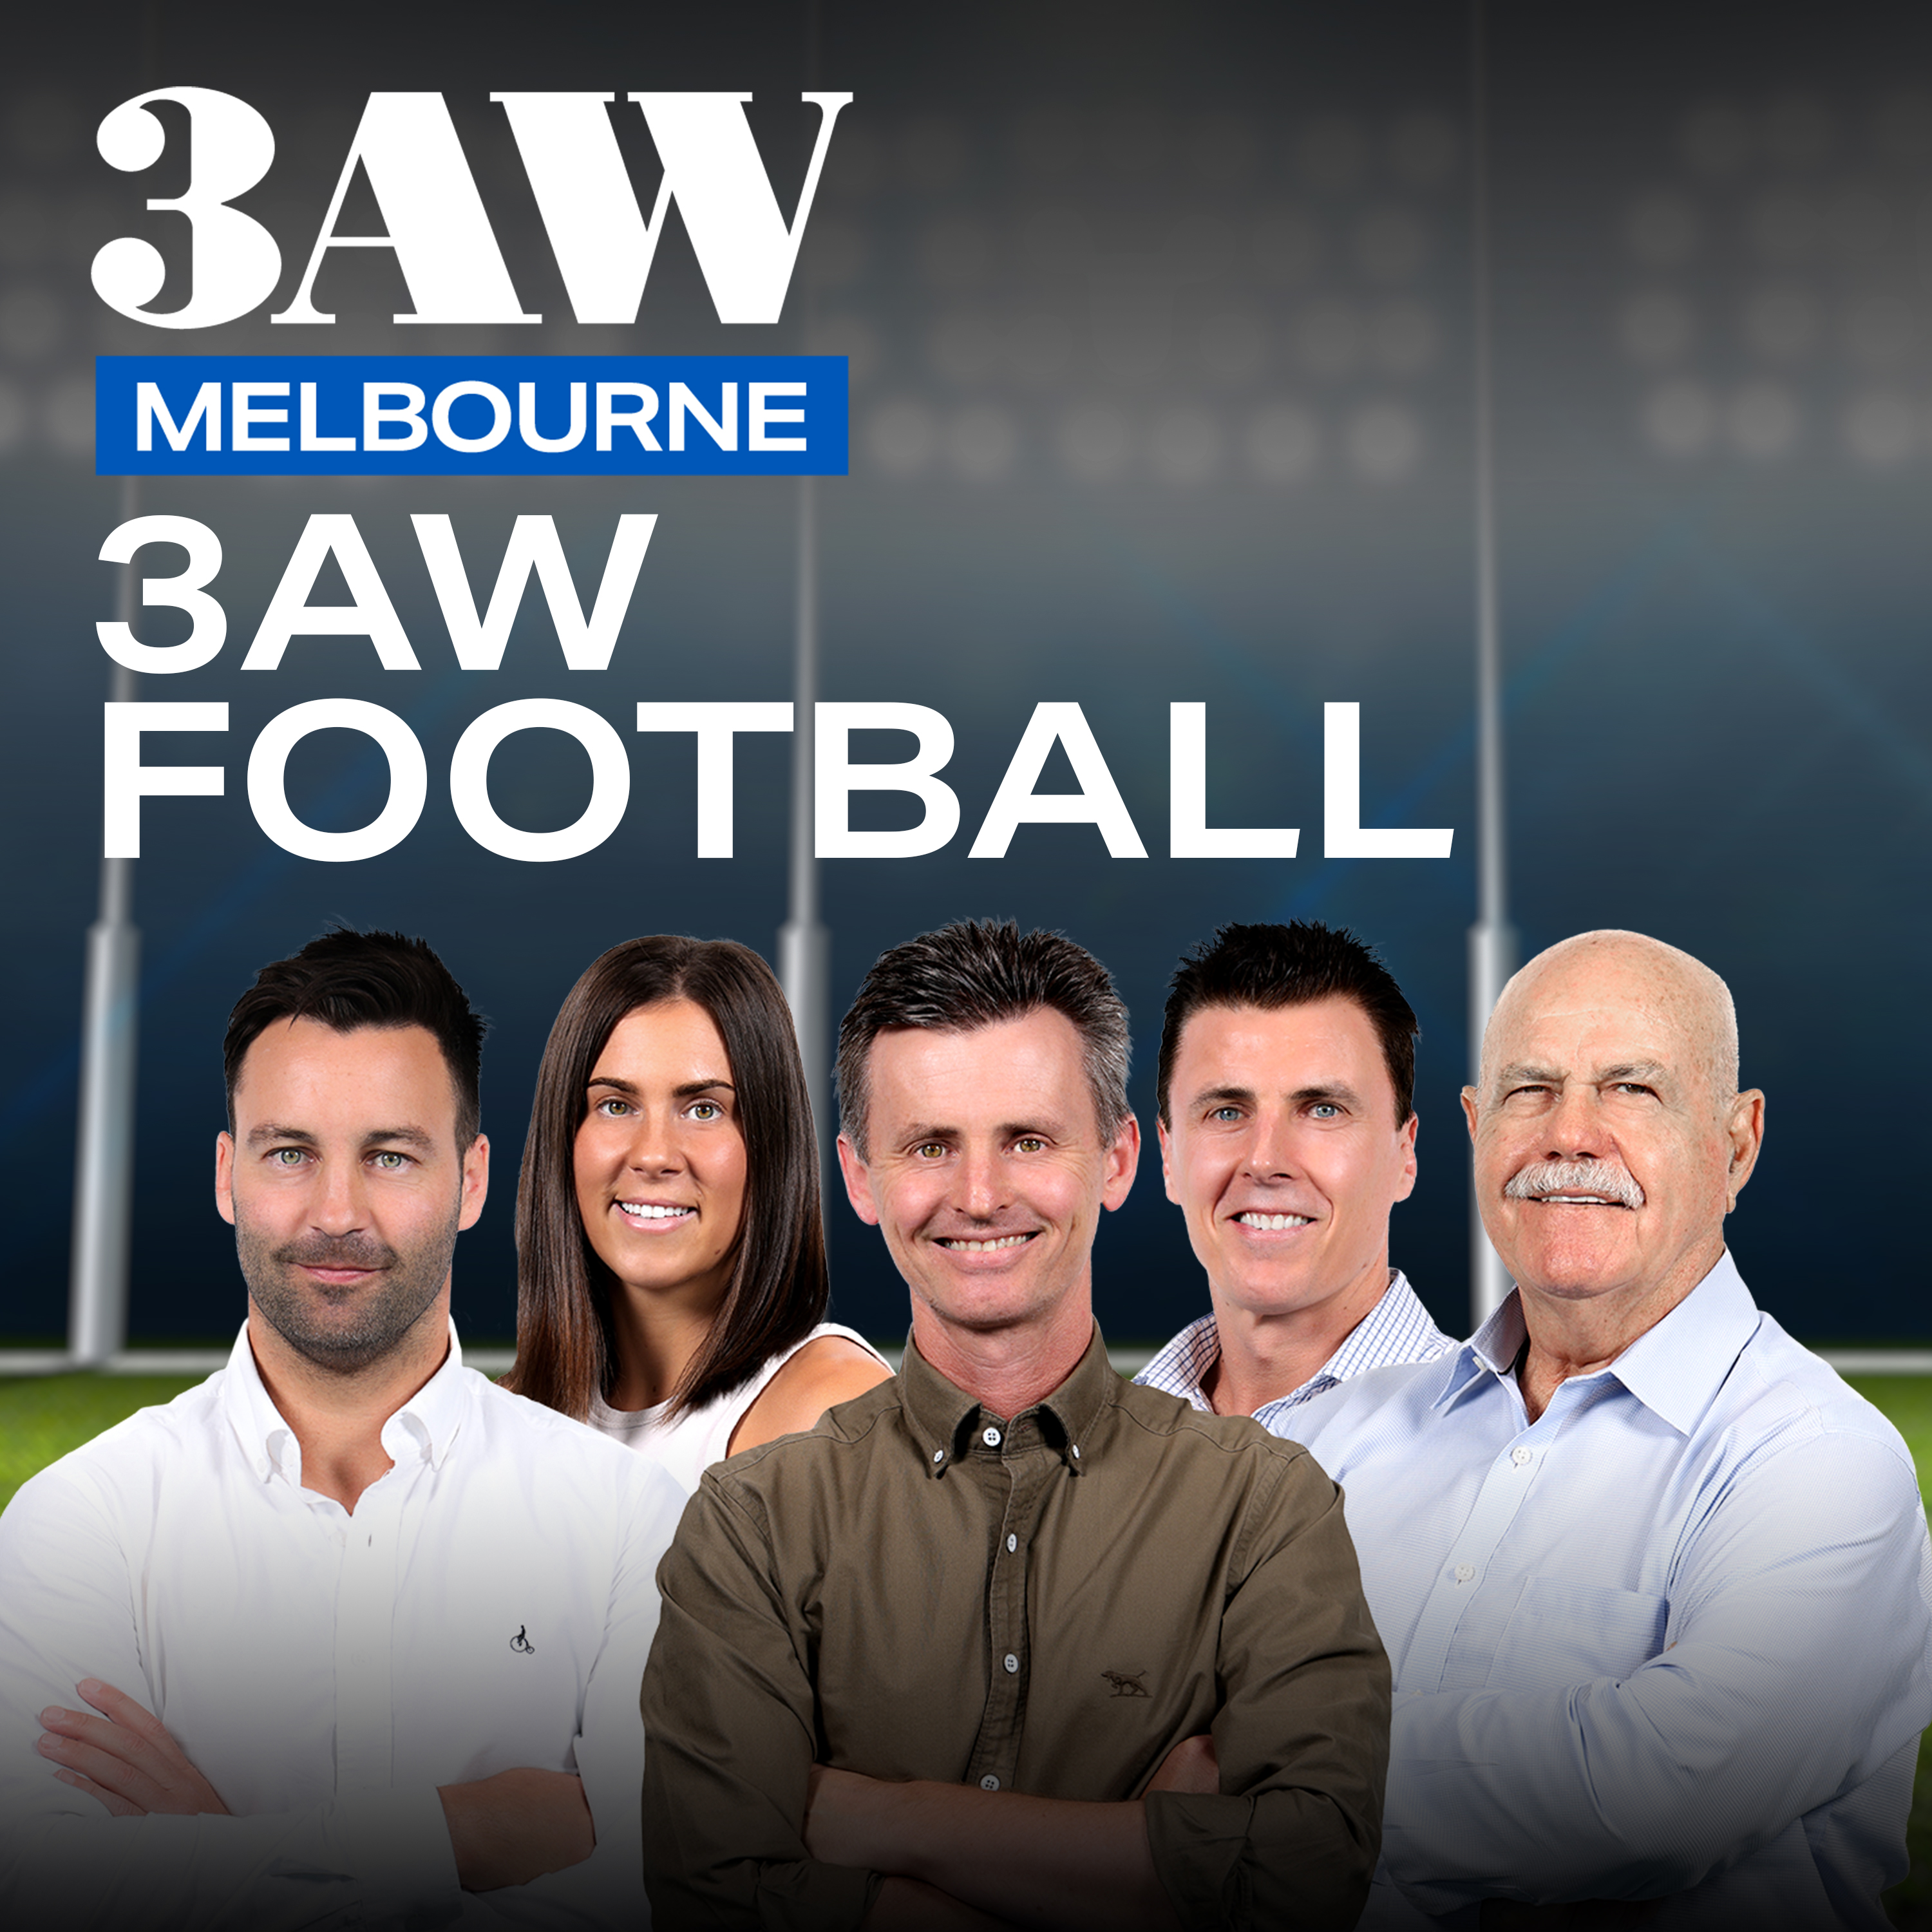 Proud parents Gene and Deborah Madgen speak to 3AW before their son Jack's debut for Collingwood